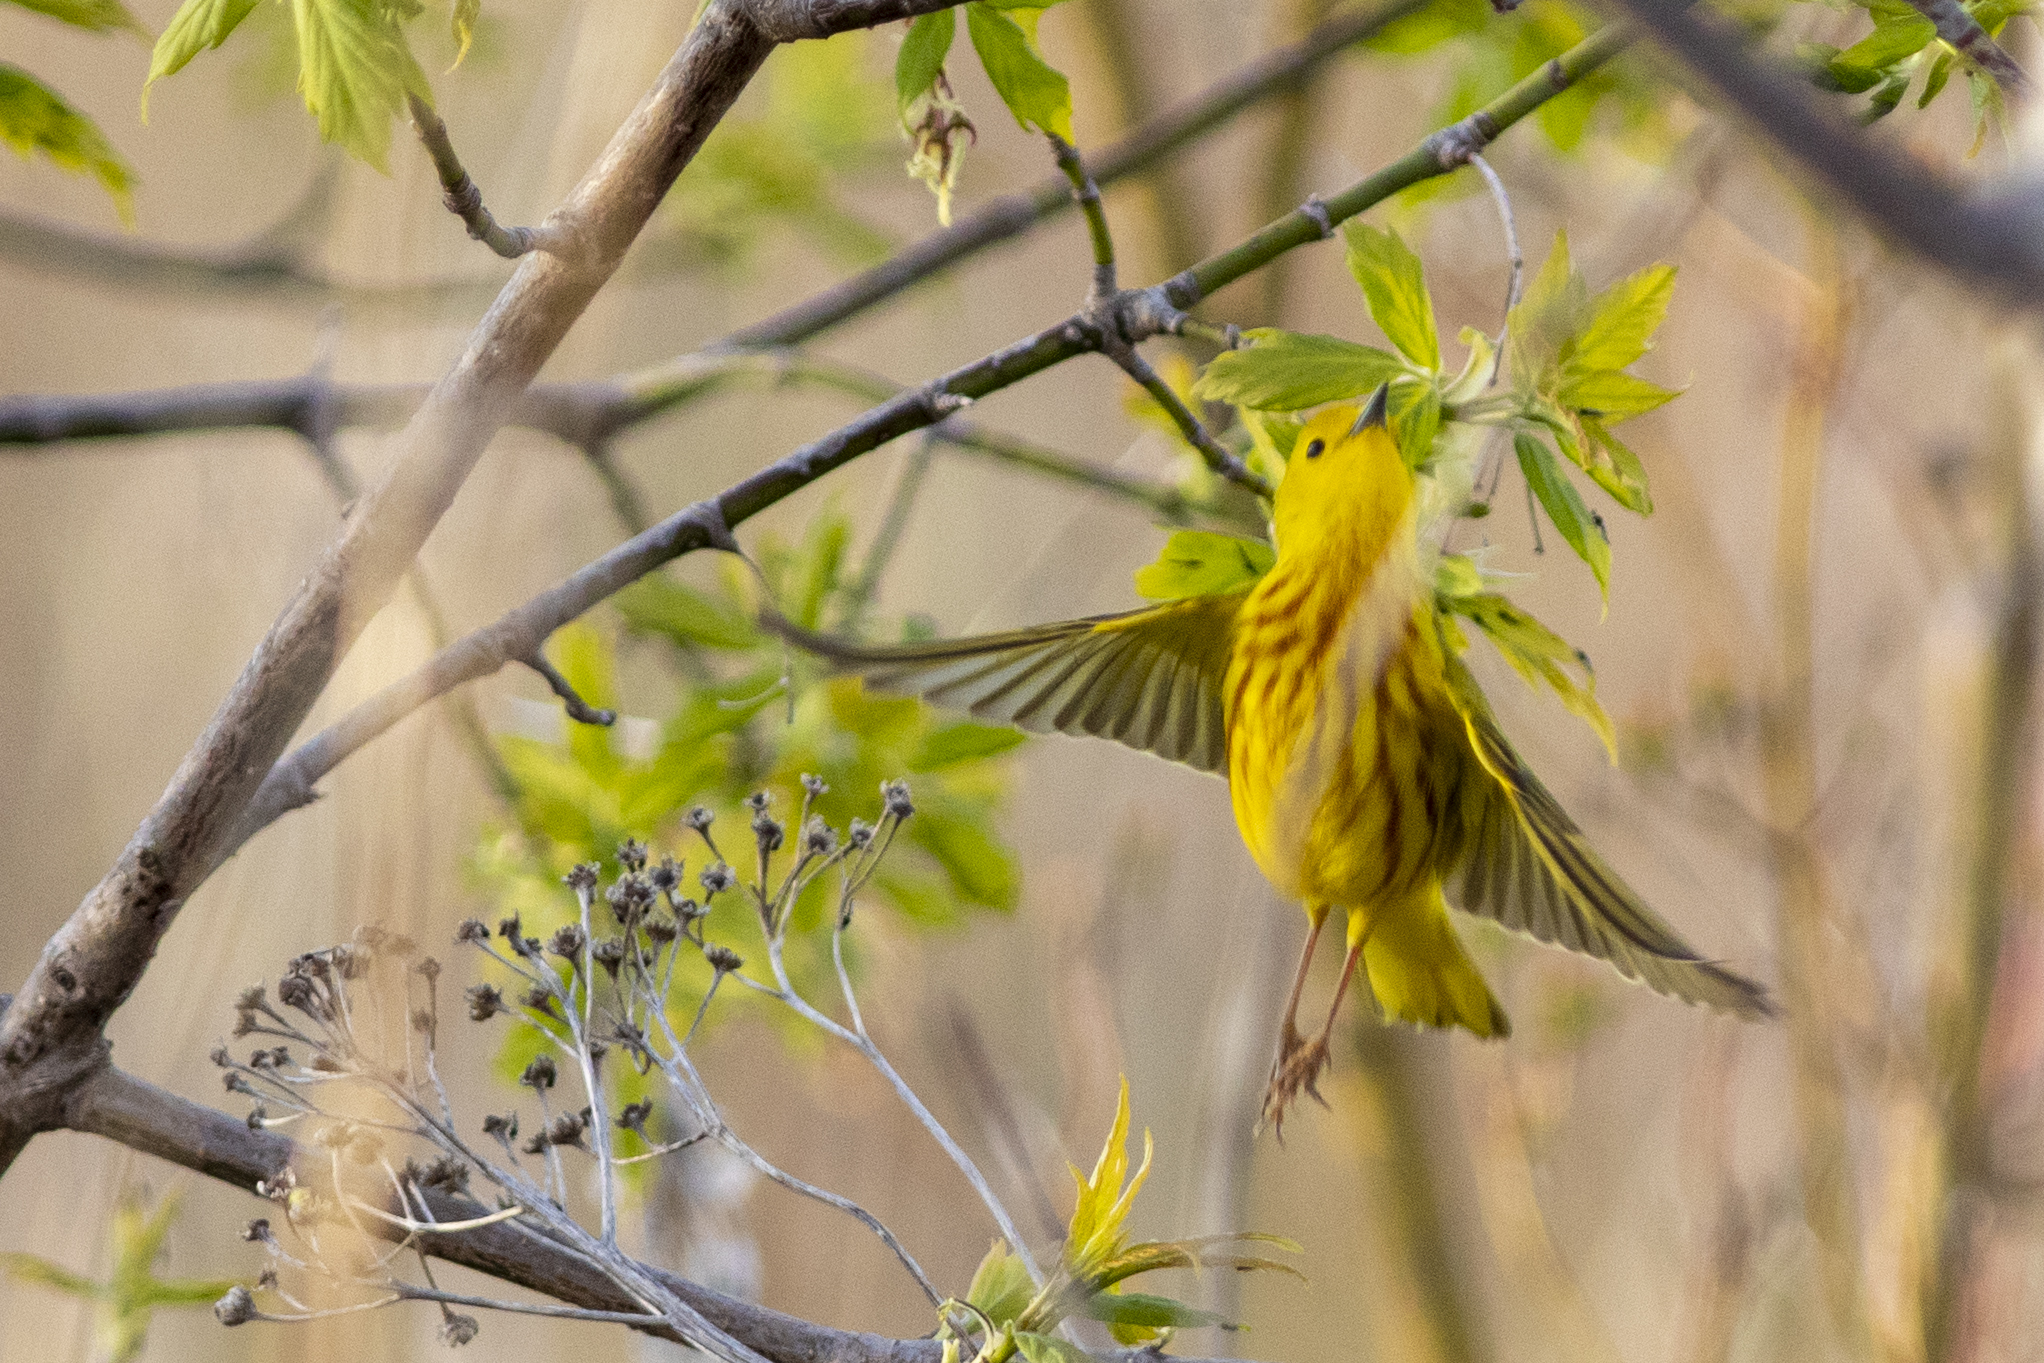 A close up of a small yellow bird with brown streaks on its belly, flying upwards past leaves and branches.